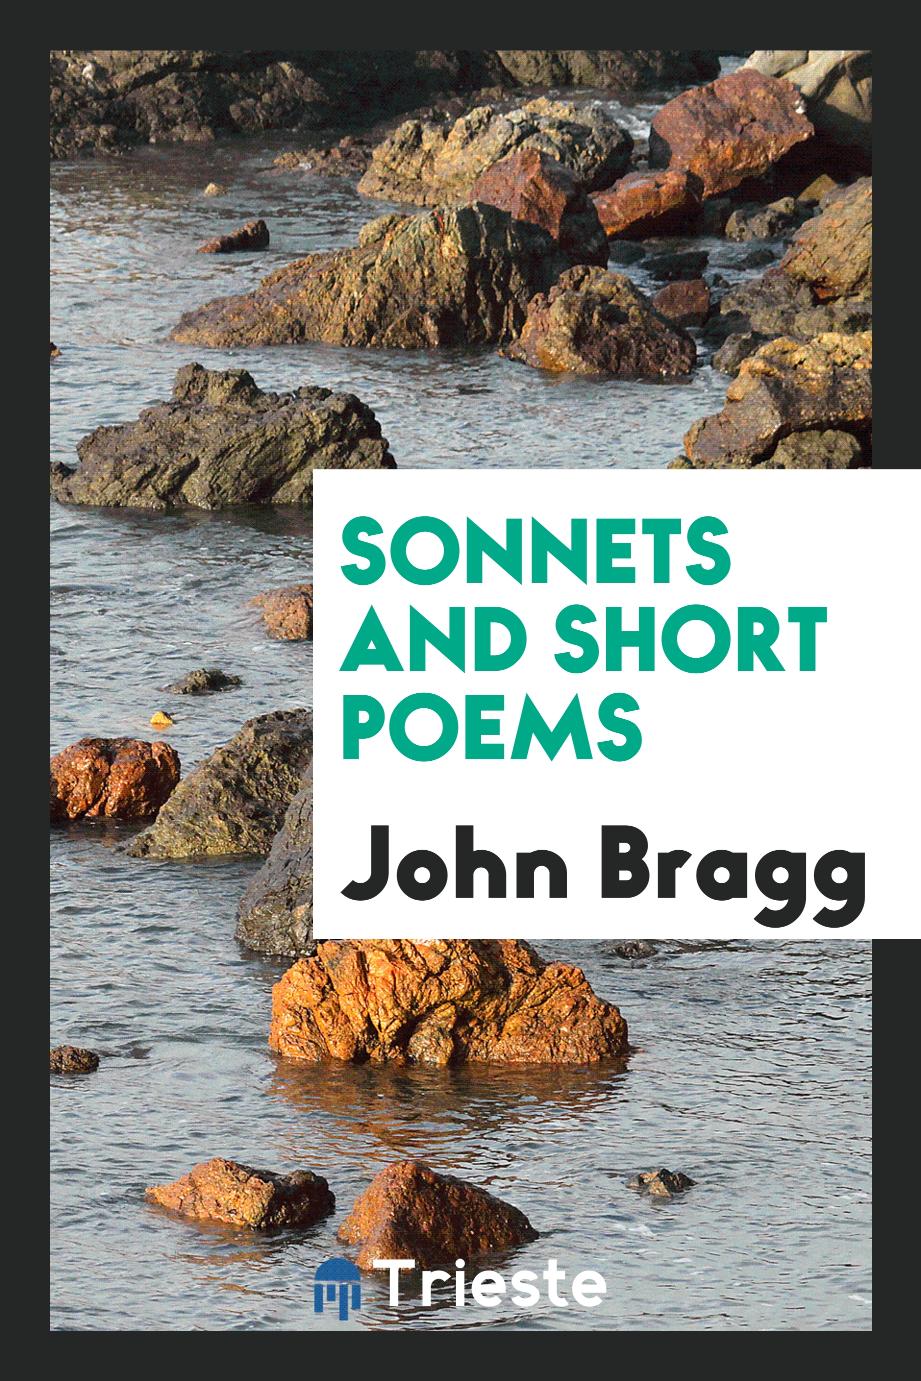 Sonnets and short poems